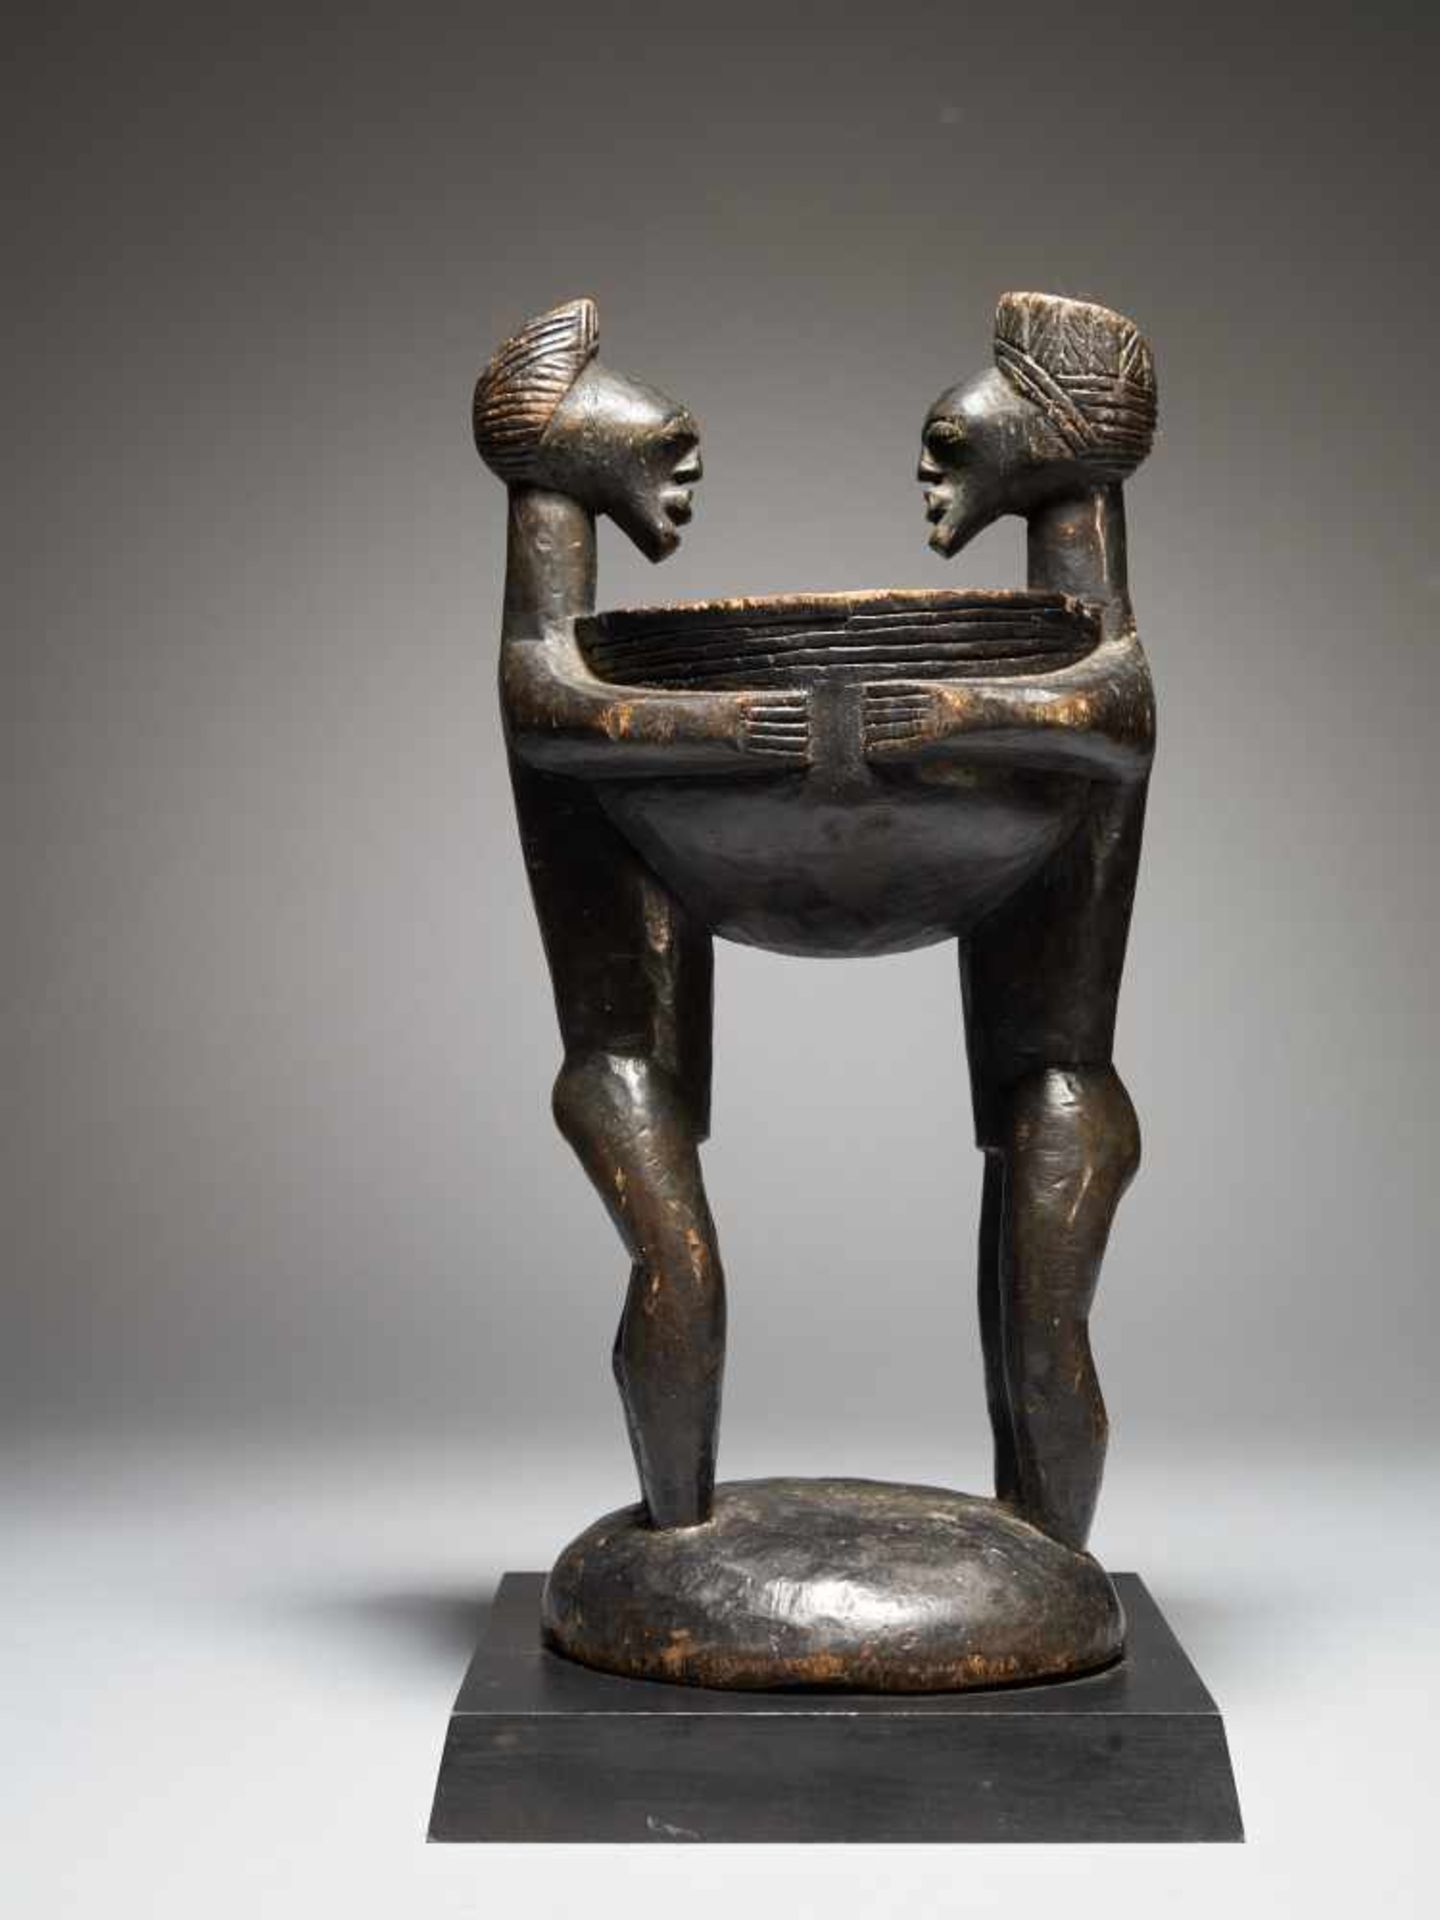 Rare Bowl carried by Standing Figures - Songye People, DRC - Tribal ArtA Rare Bowl carried by